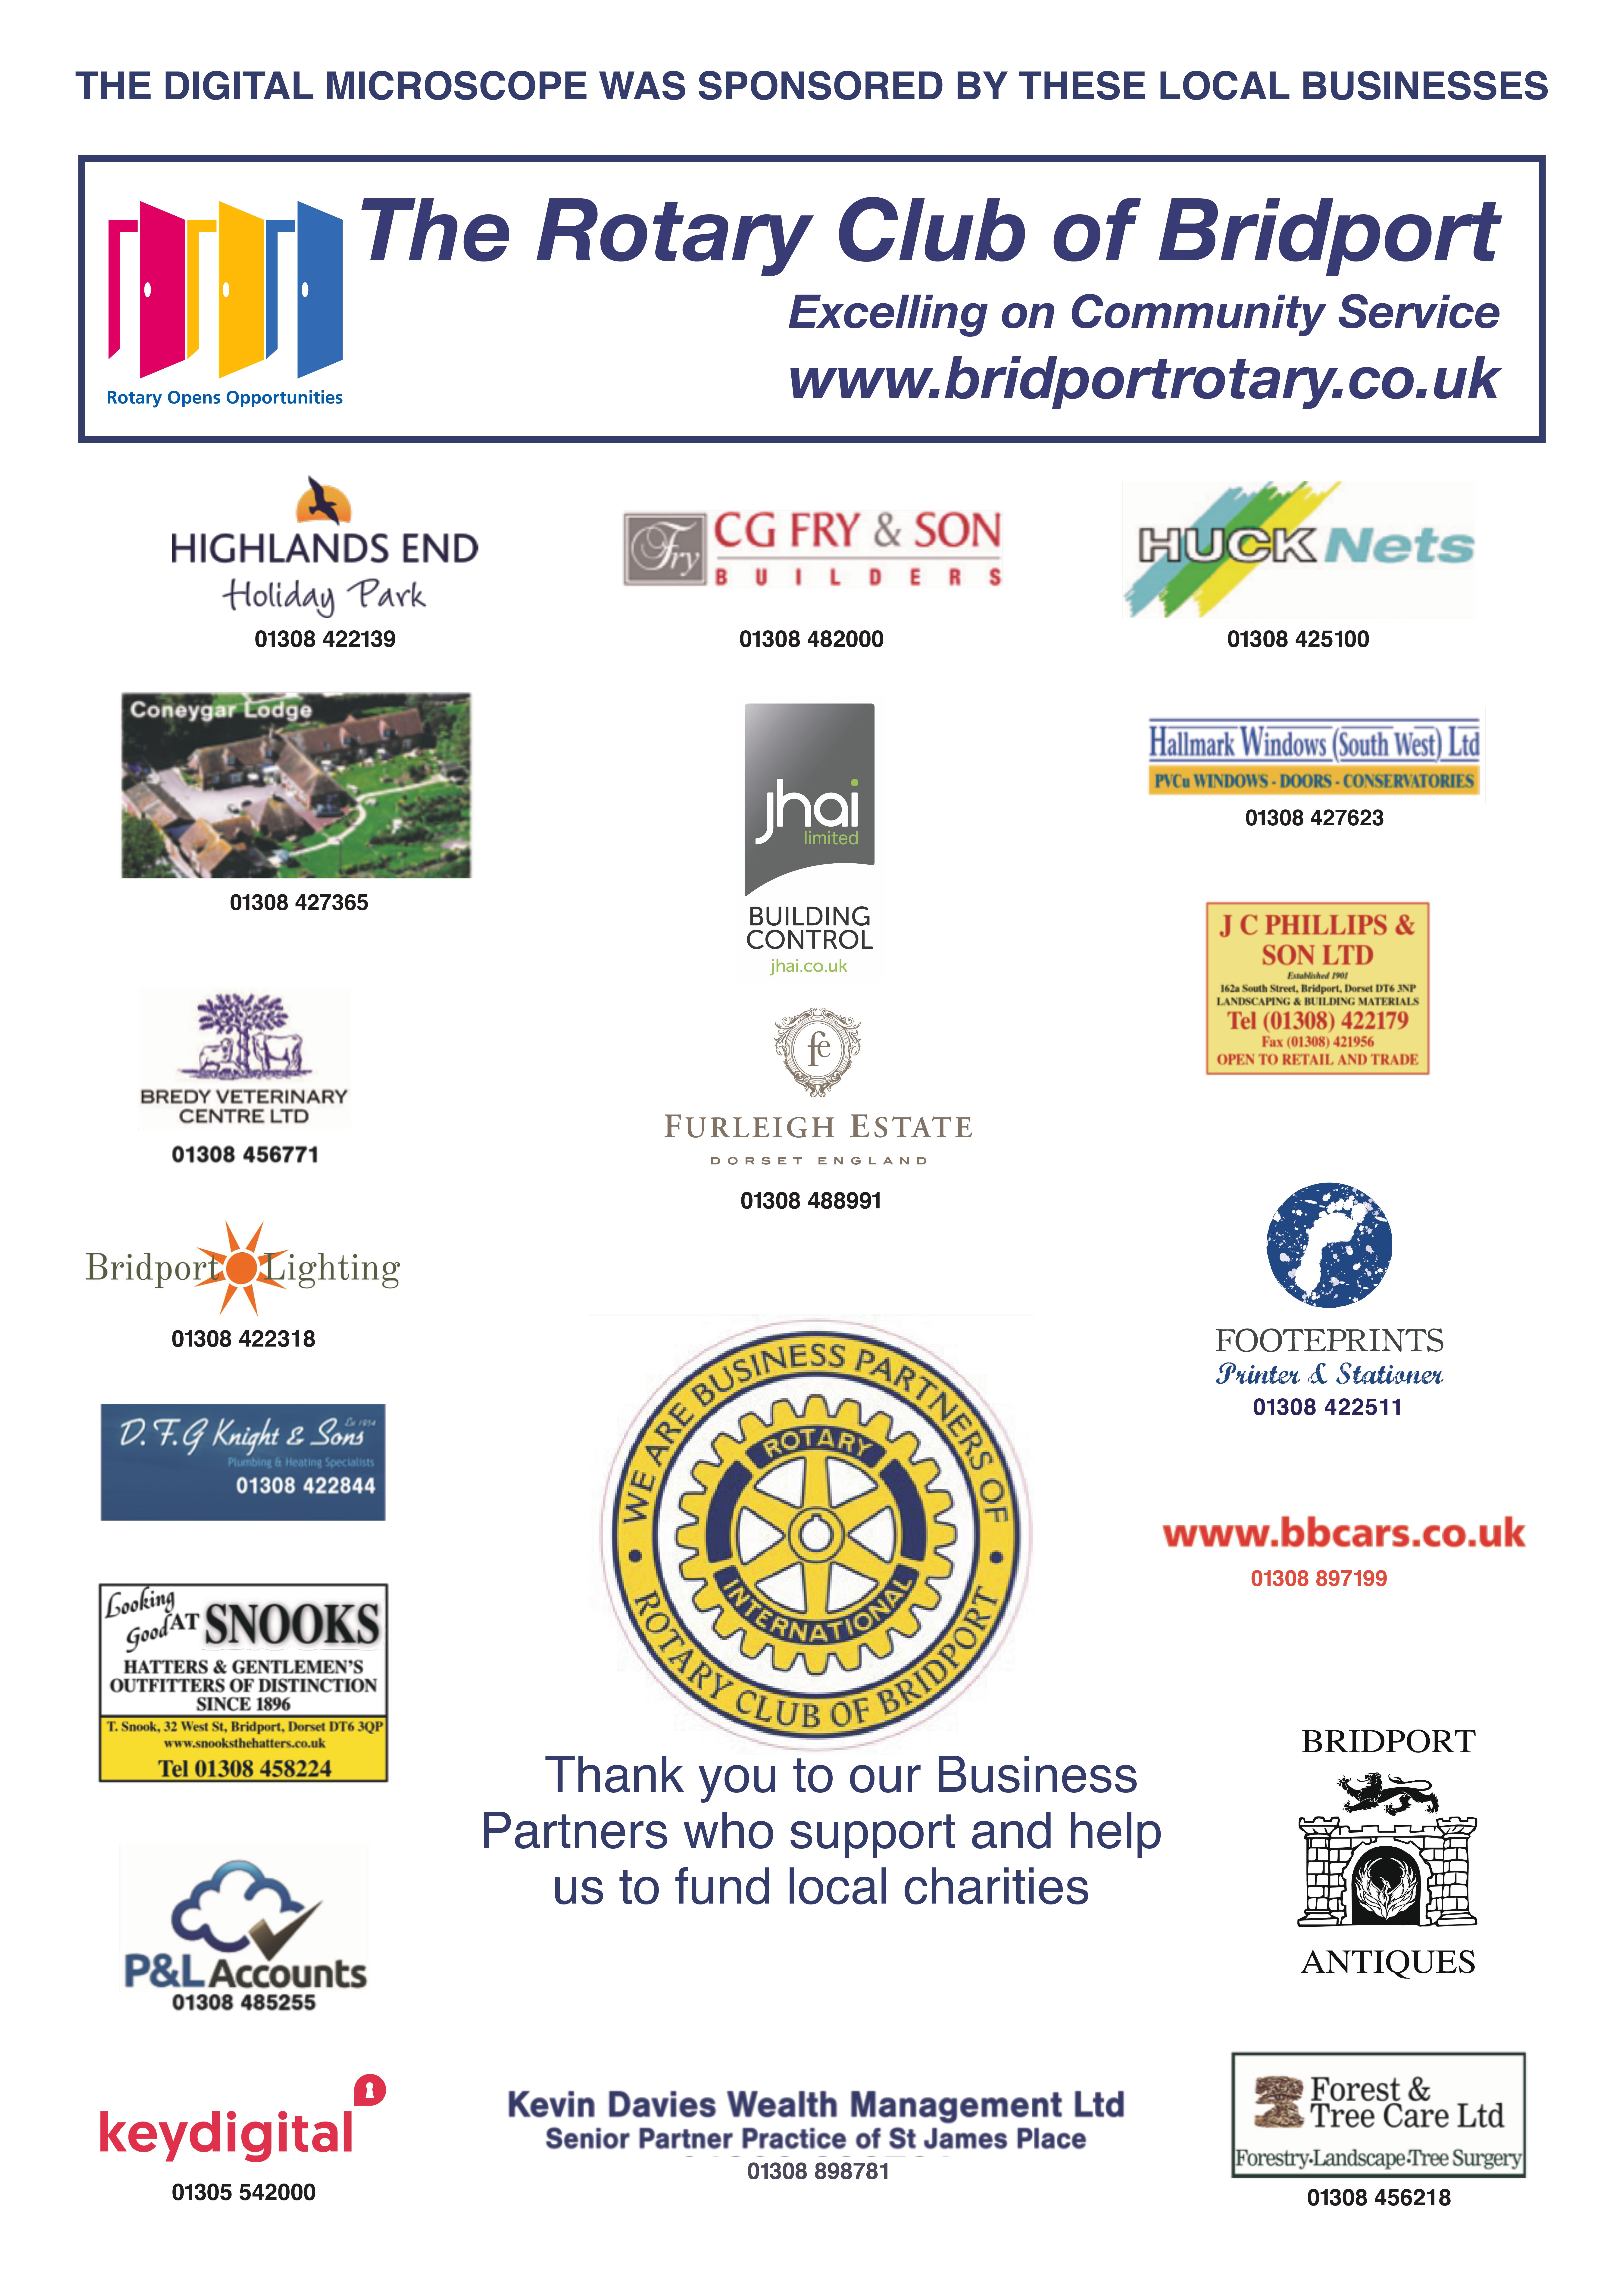 The Bridport Rotary Club's Business partners